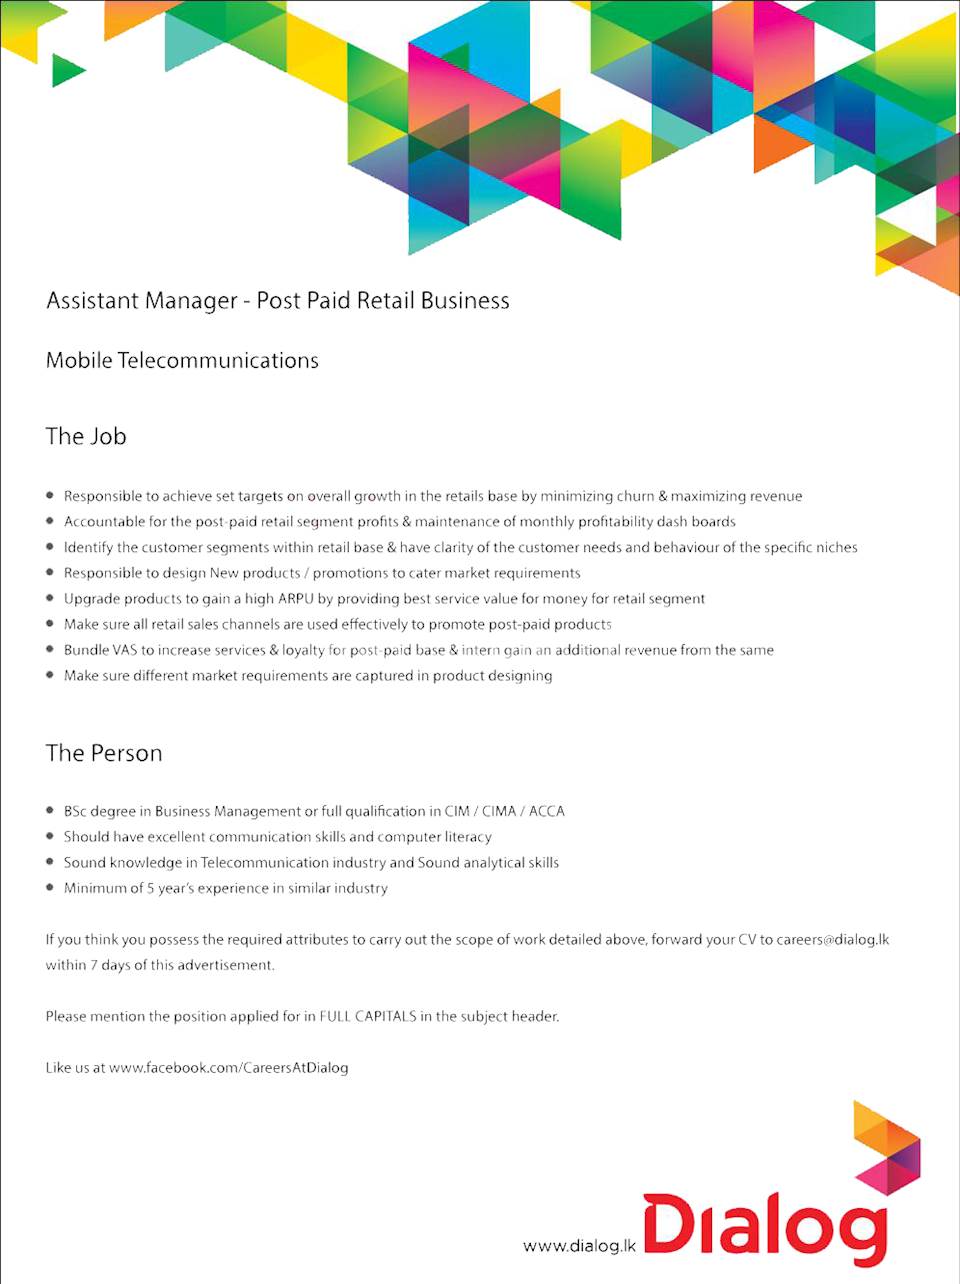 Assistant Manager - Post paid Retail Business 